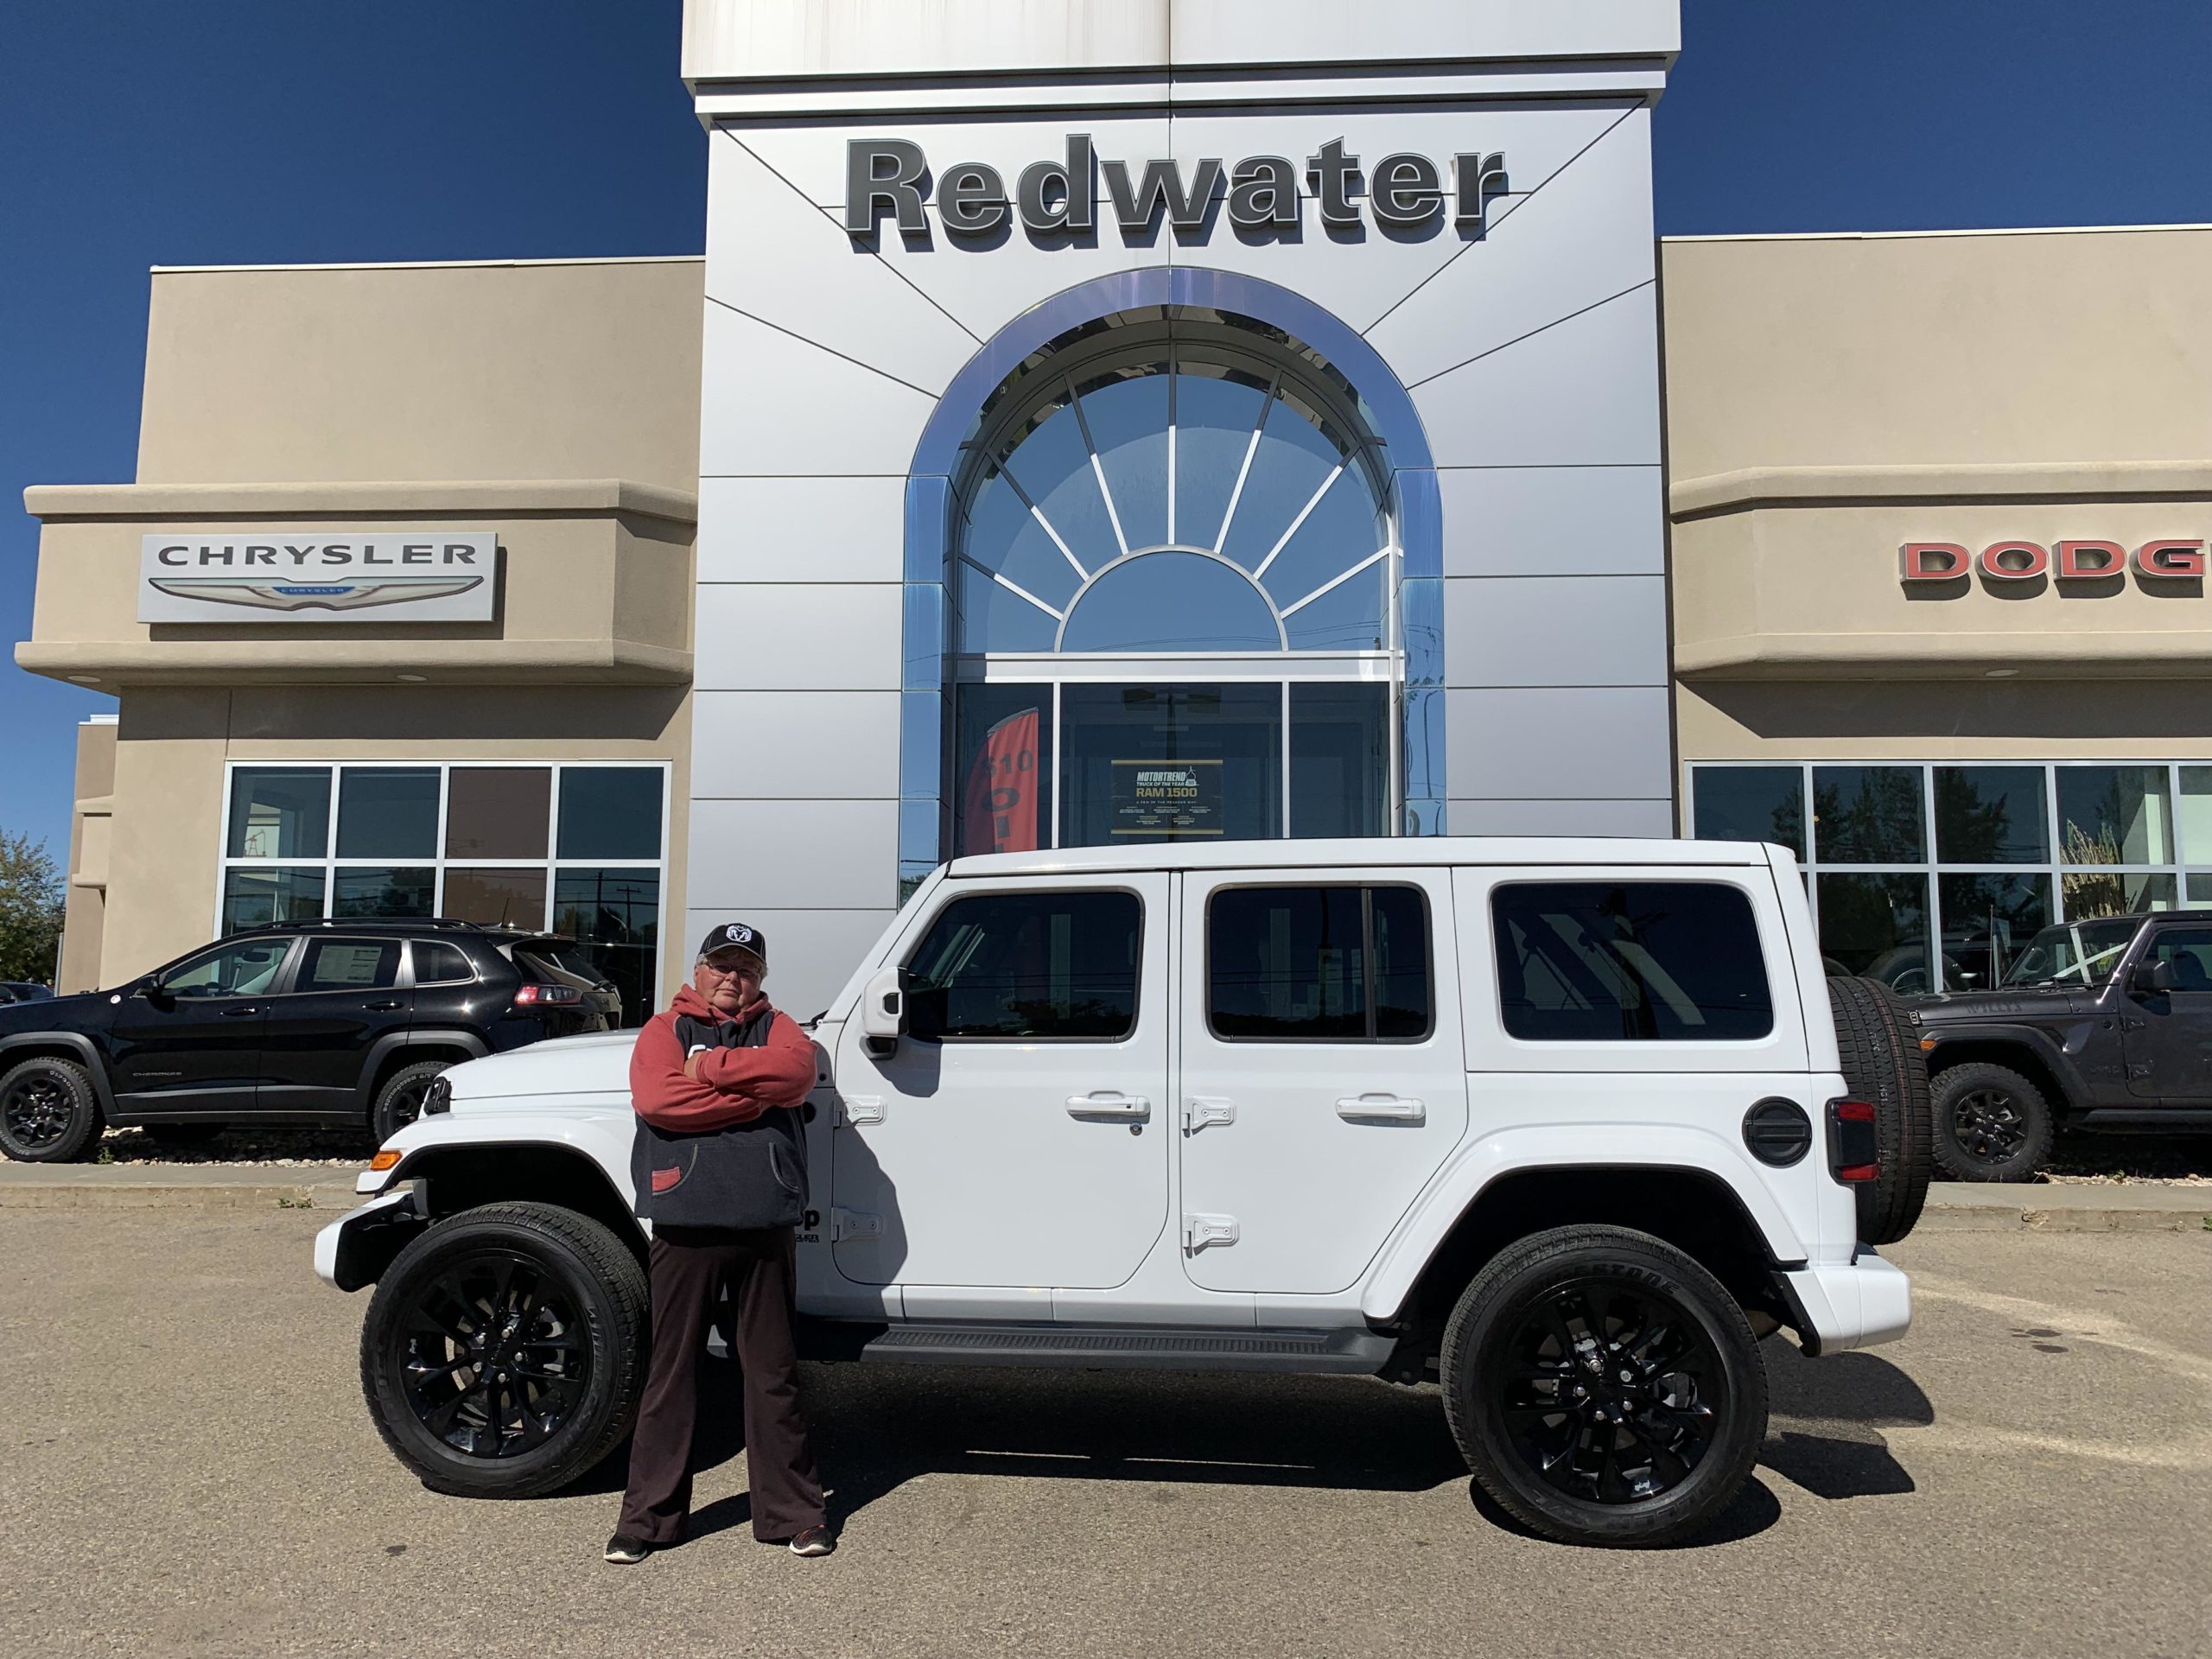 NR17960A 2021 Jeep Wrangler Unlimited High Altitude 4x4 Redwater Dodge